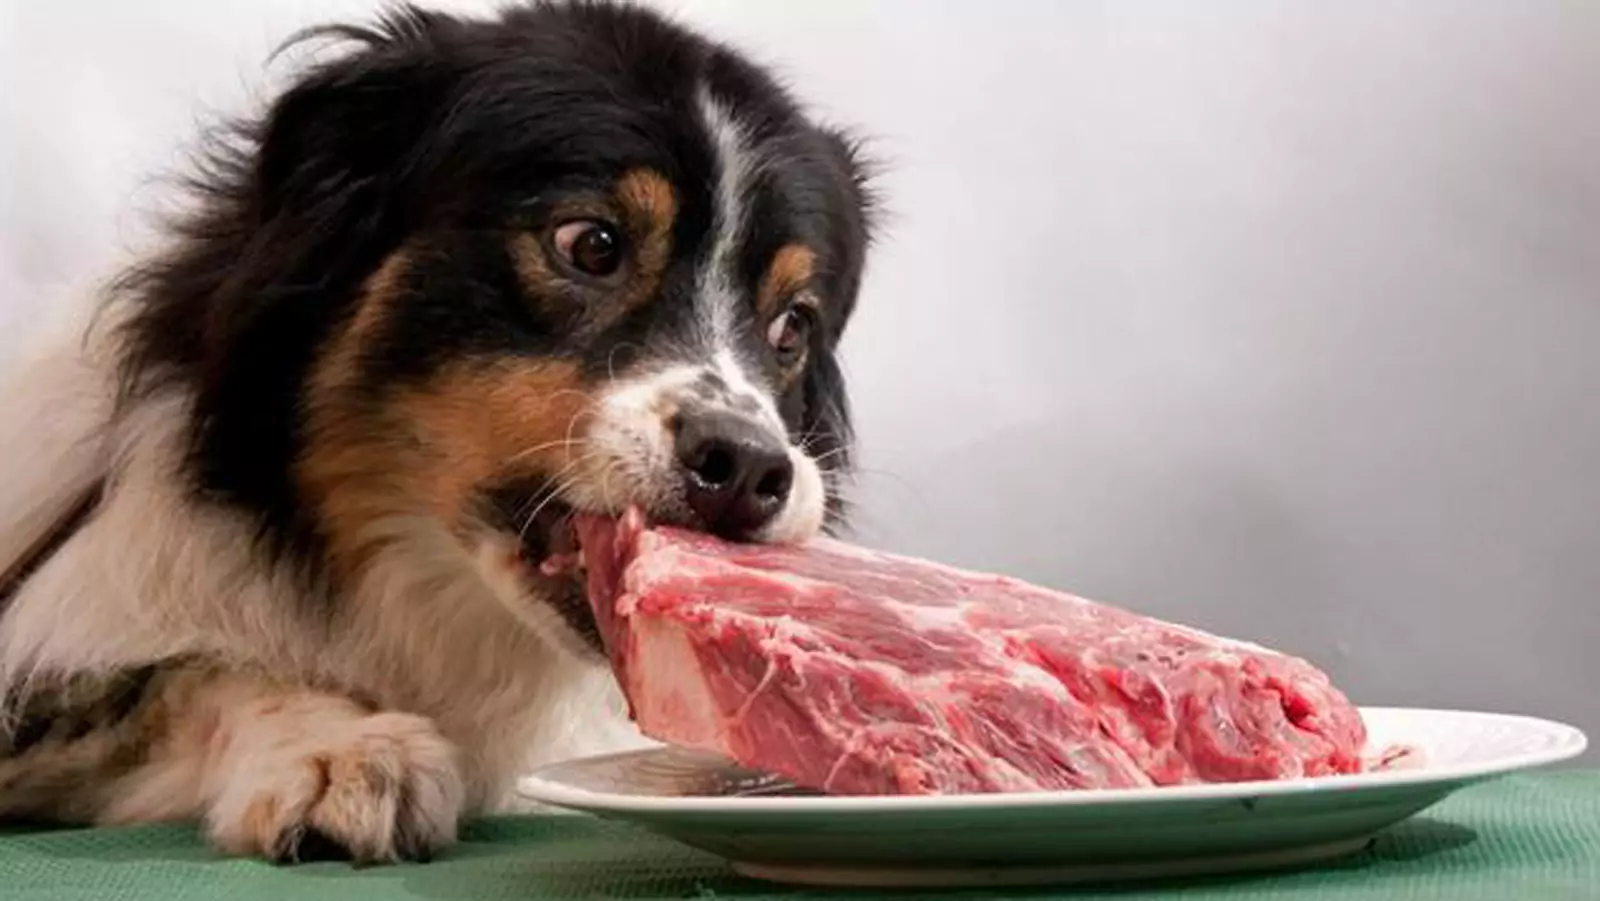 Can dogs eat raw pork?